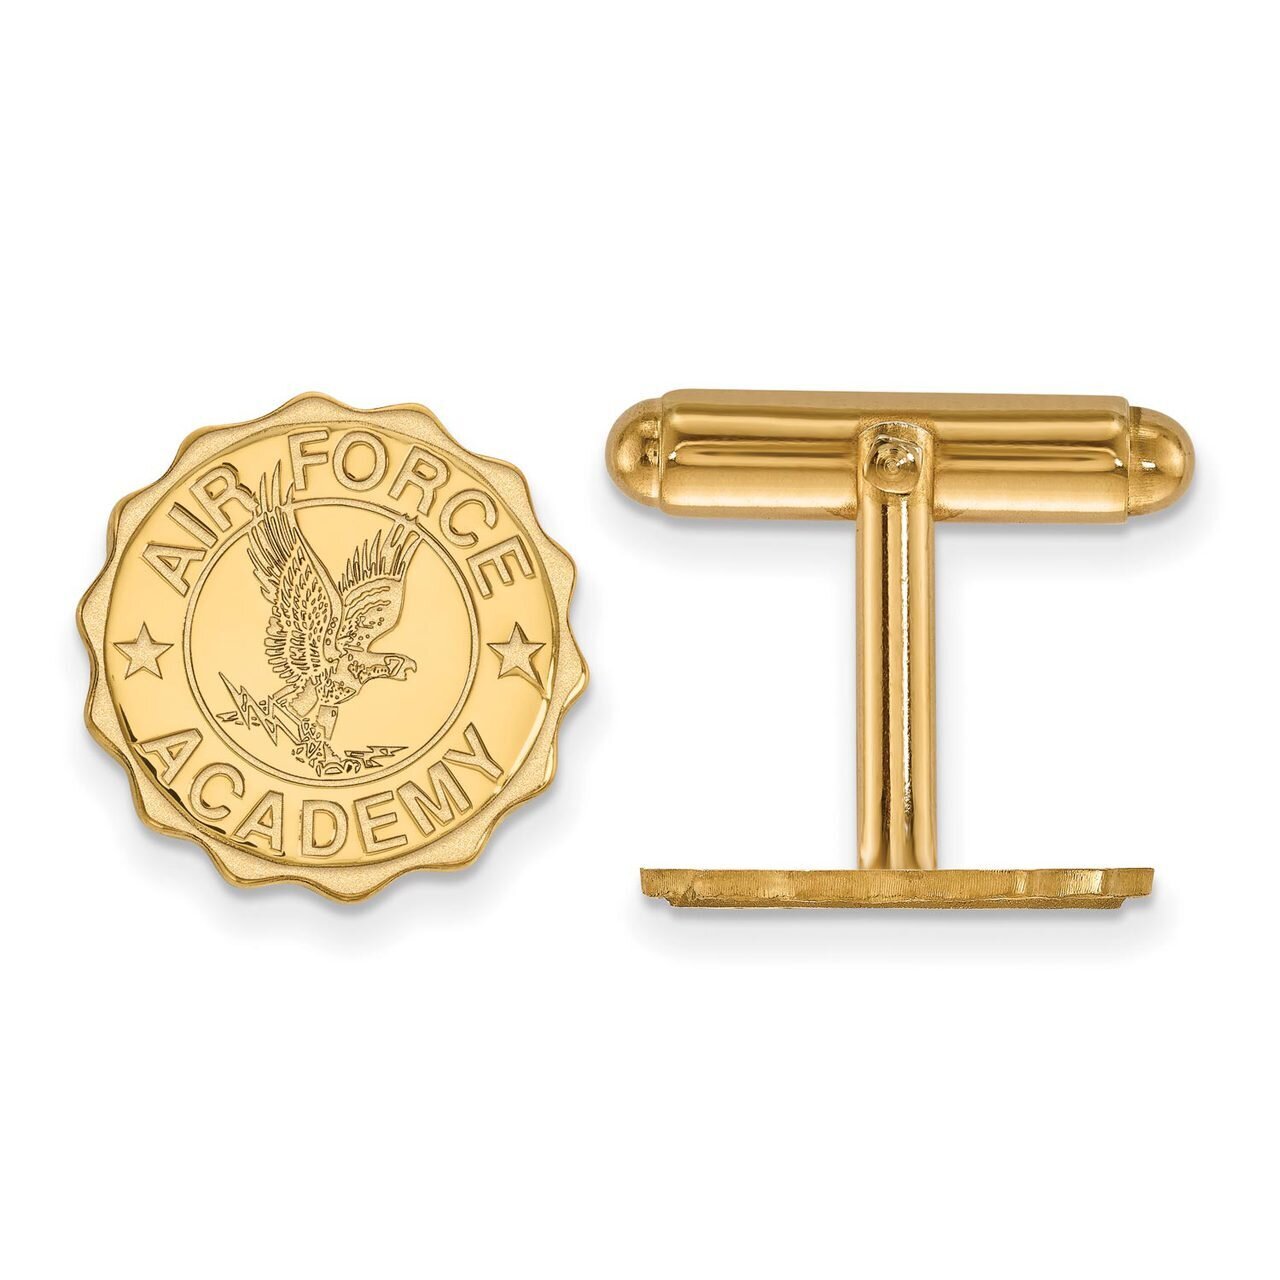 United States Air Force Academy Crest Cufflinks 14k Yellow Gold 4Y025USA